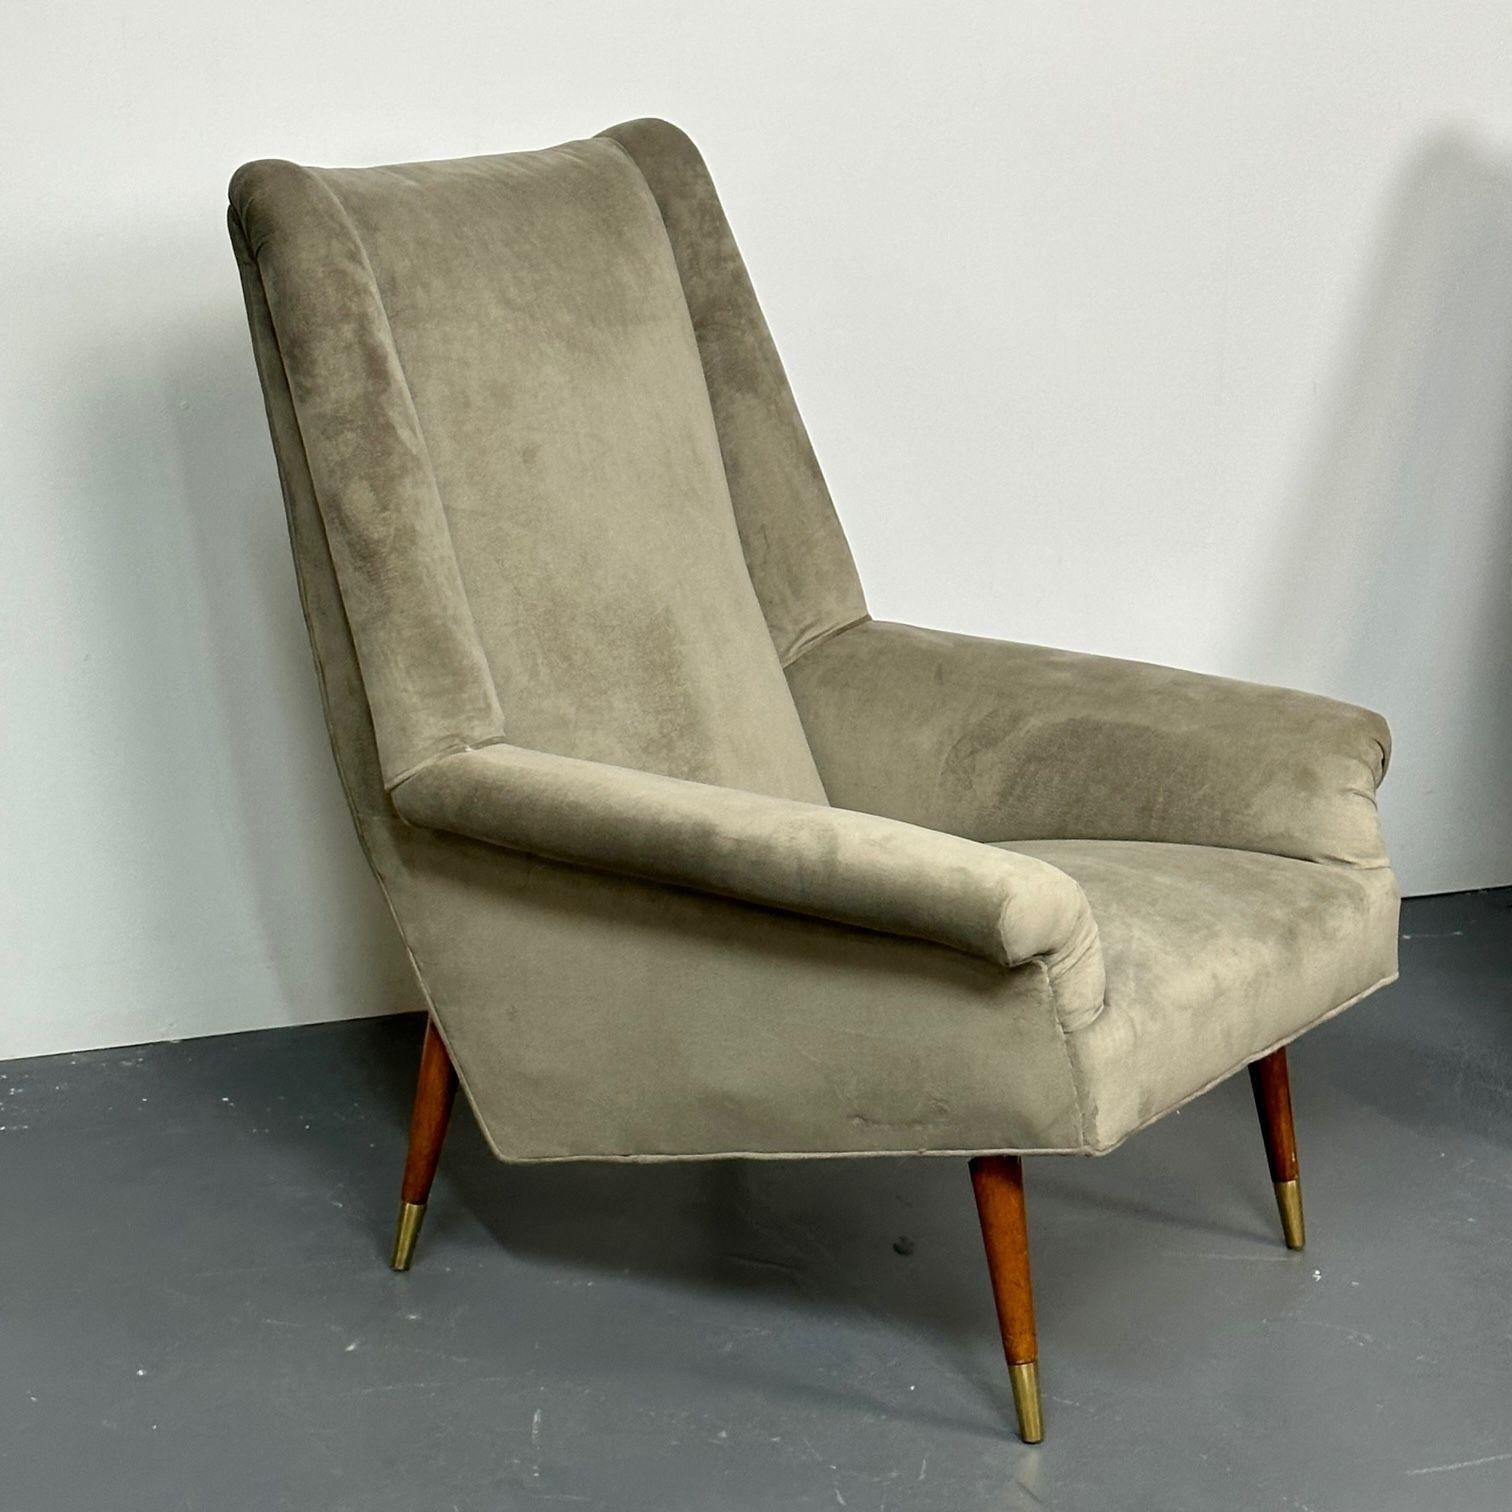 Fabric Gio Ponti Style, Mid-Century Modern, Wingback Chairs, Grey Velvet, Wood, 1950s For Sale